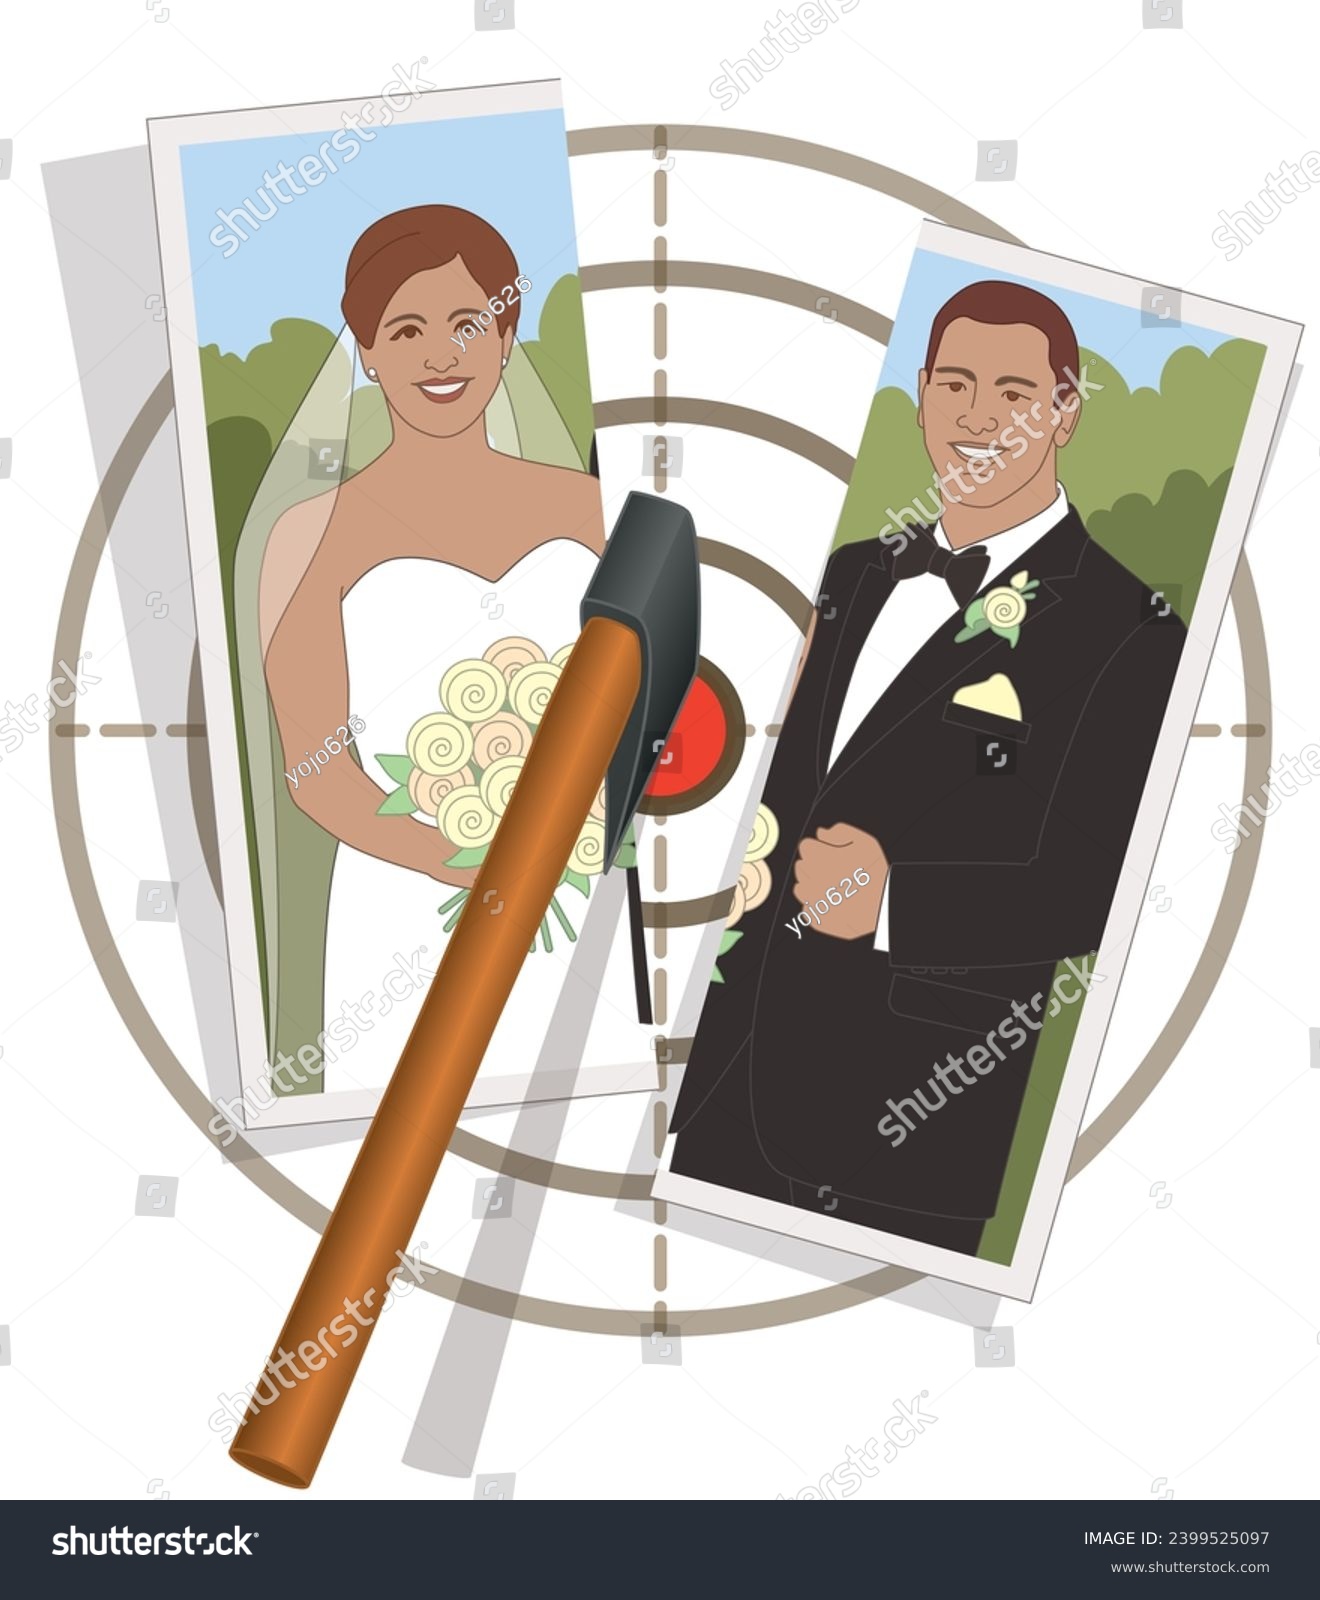 SVG of axe throwing, axe cutting in half photo of bride and groom on target isolated on a white background svg